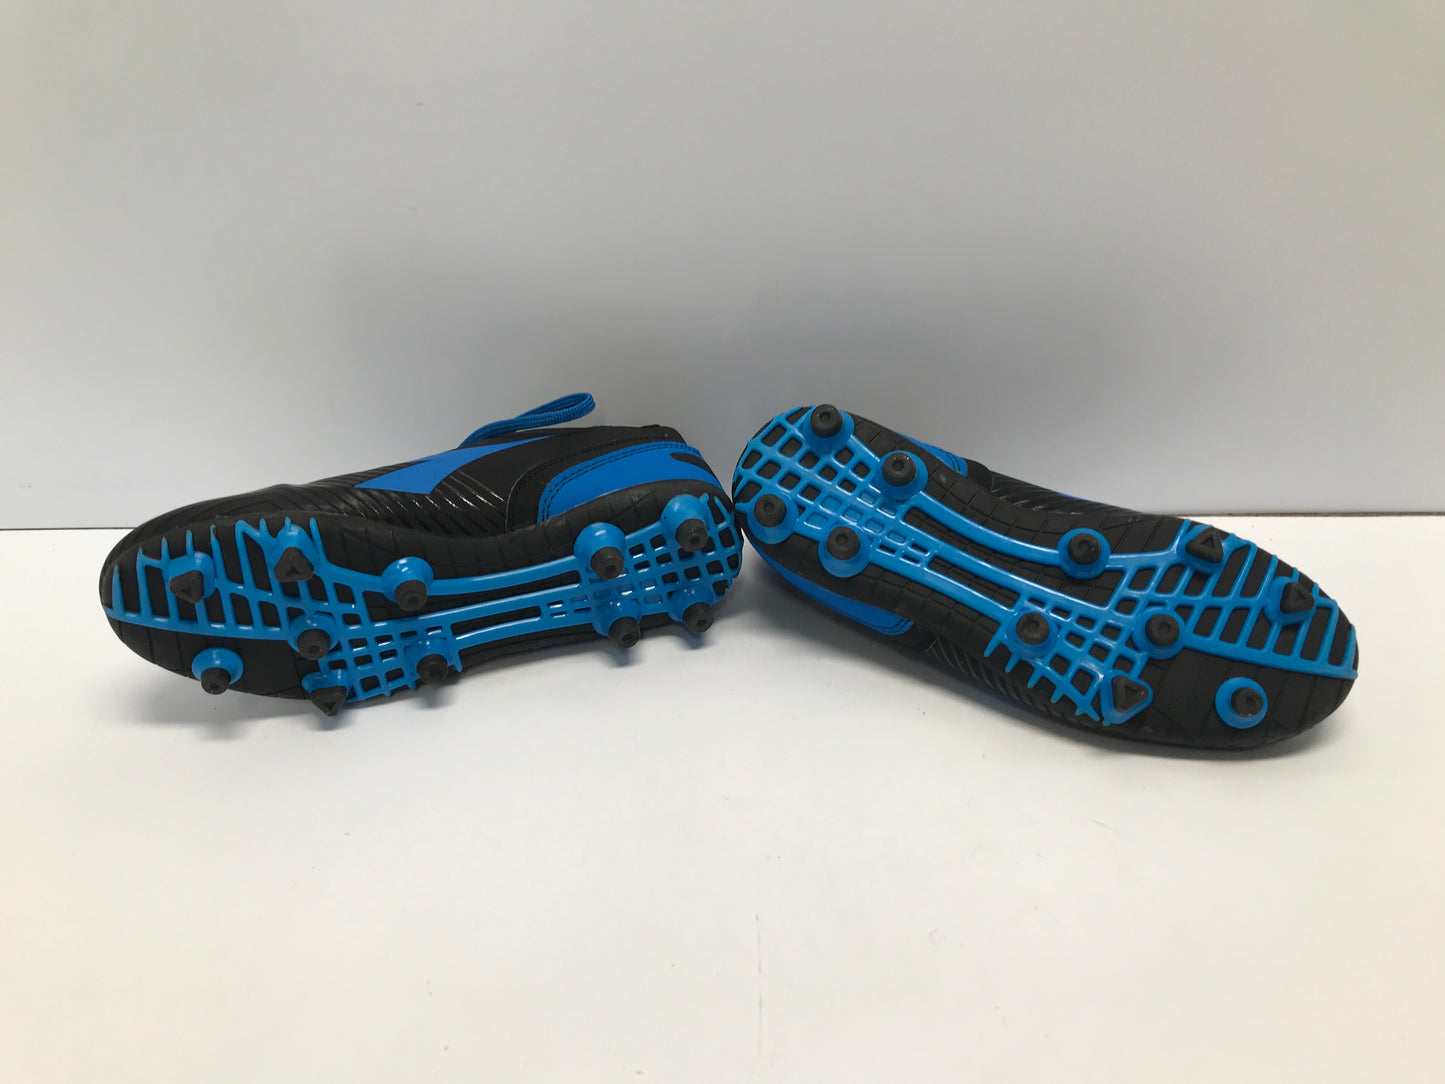 Soccer Shoes Cleats Child Size 2 Diadora Blue Black Like New